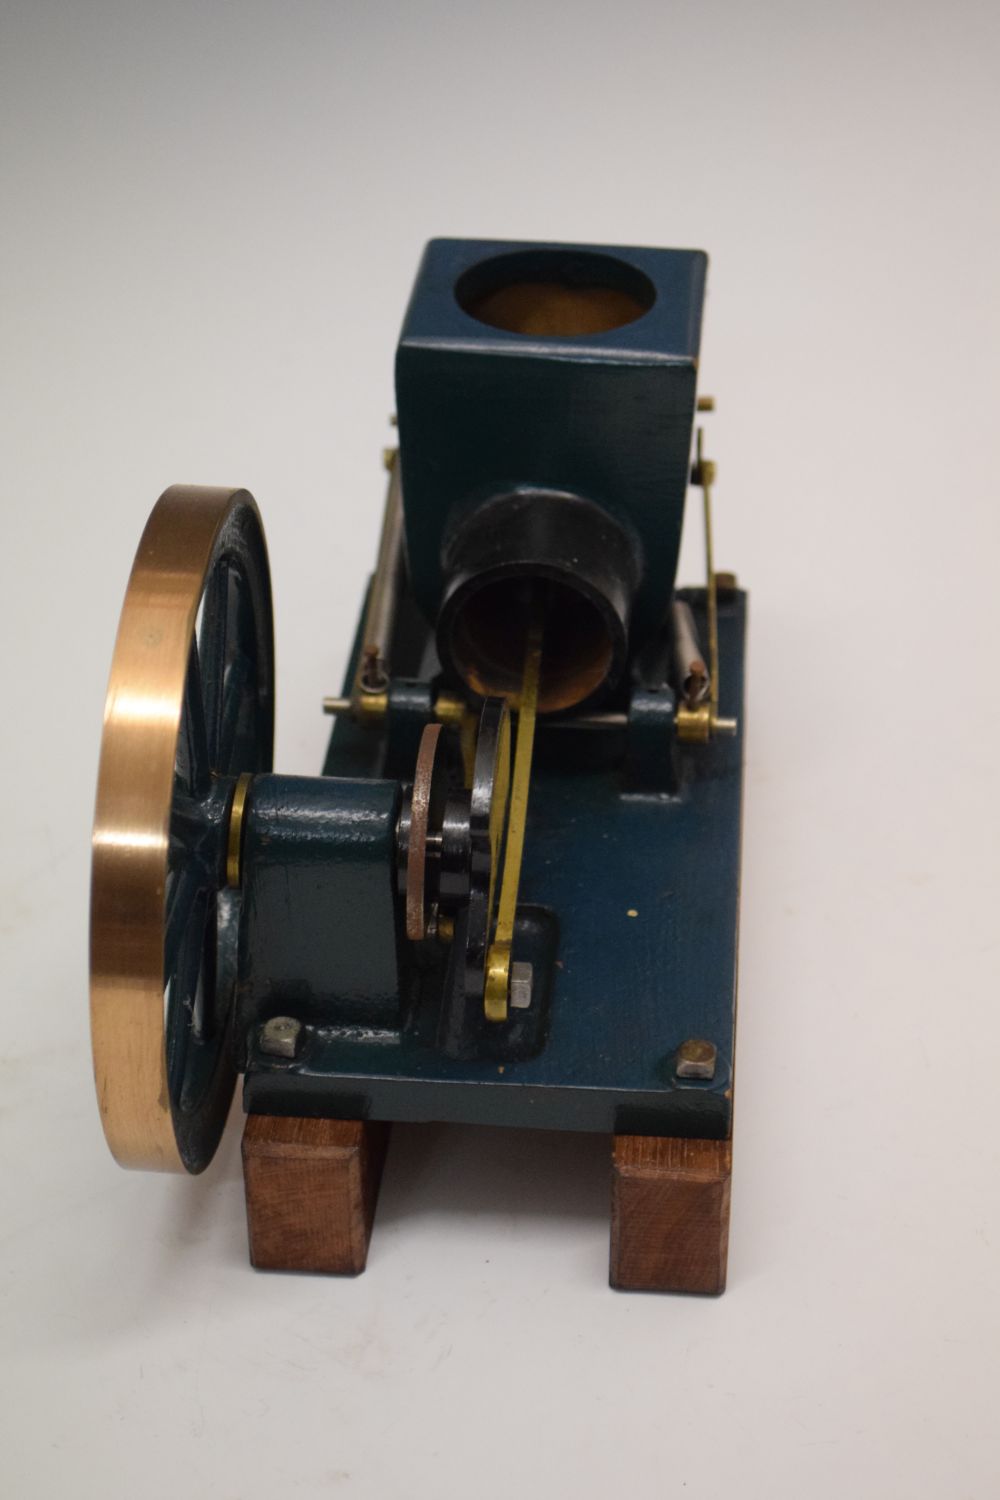 Stuart Turner model No.10 stationary steam engine, with 3-inch single fly wheel, 15cm high, on - Image 11 of 11